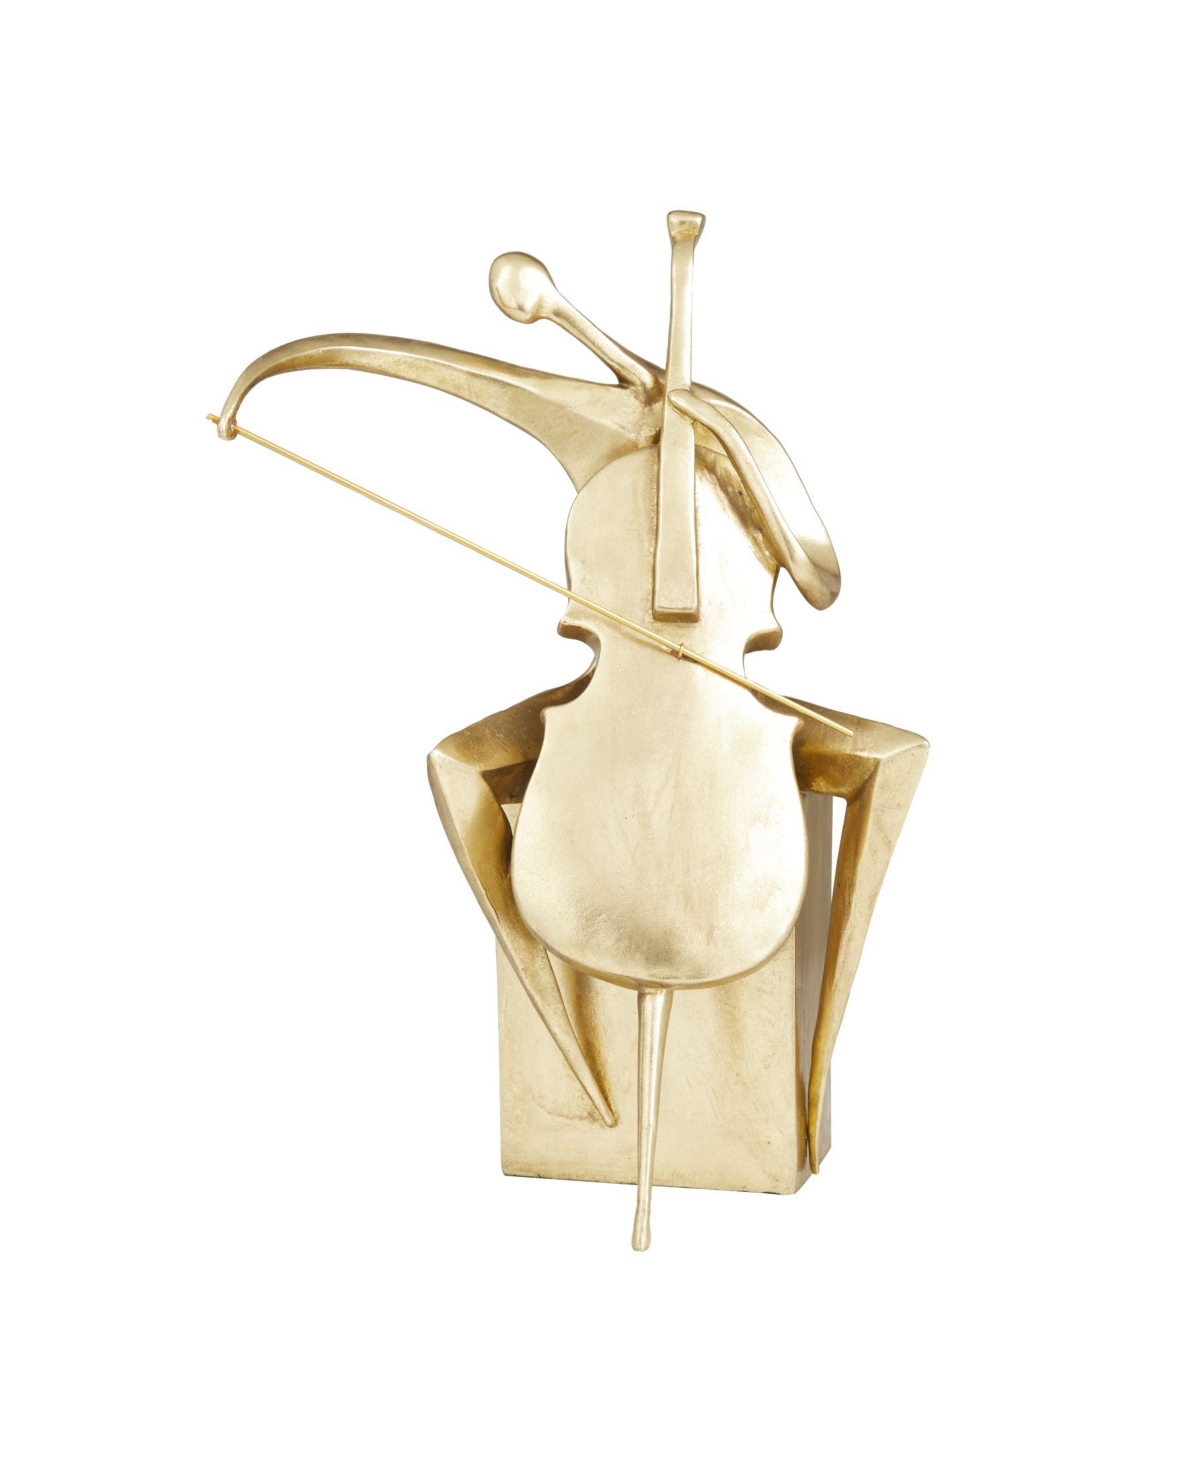 Rosemary Lane Contemporary Sculpture, 17" X 12" In Gold-tone